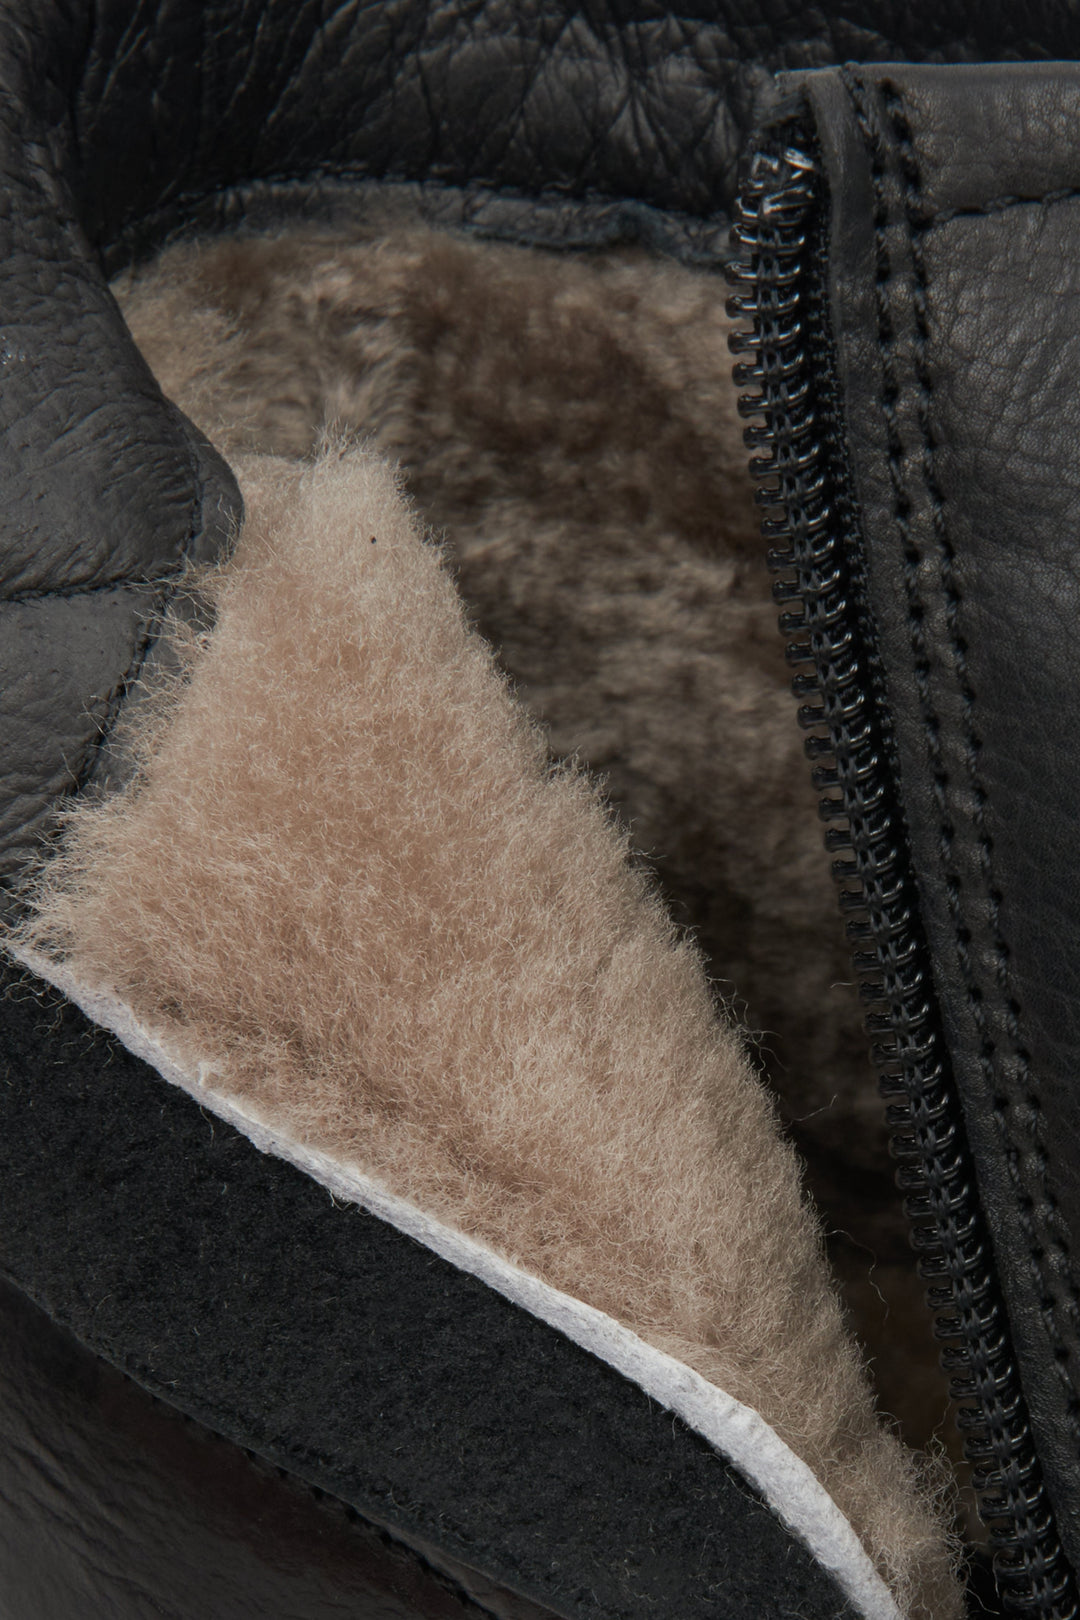 Black men's leather winter boots by Estro - close-up on the soft insole.